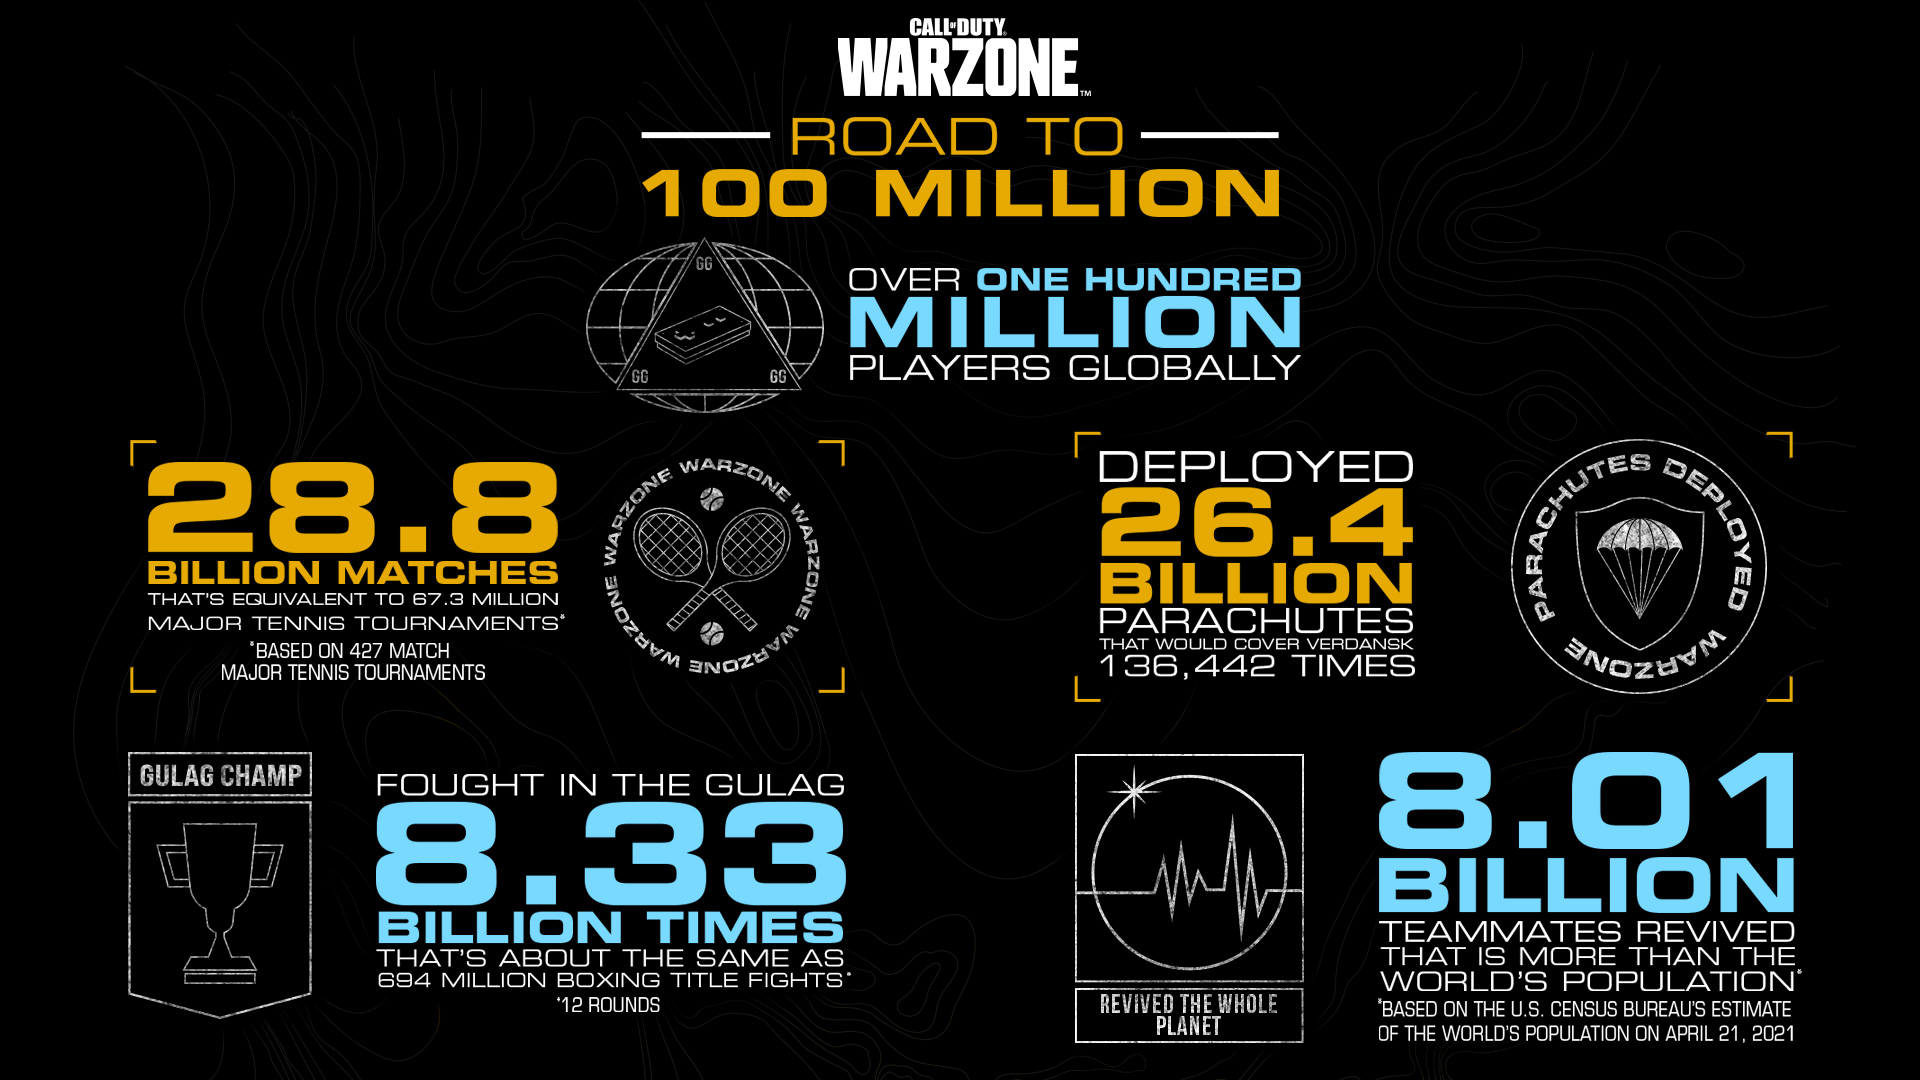 Call of Duty Warzone Live Player Count and Statistics